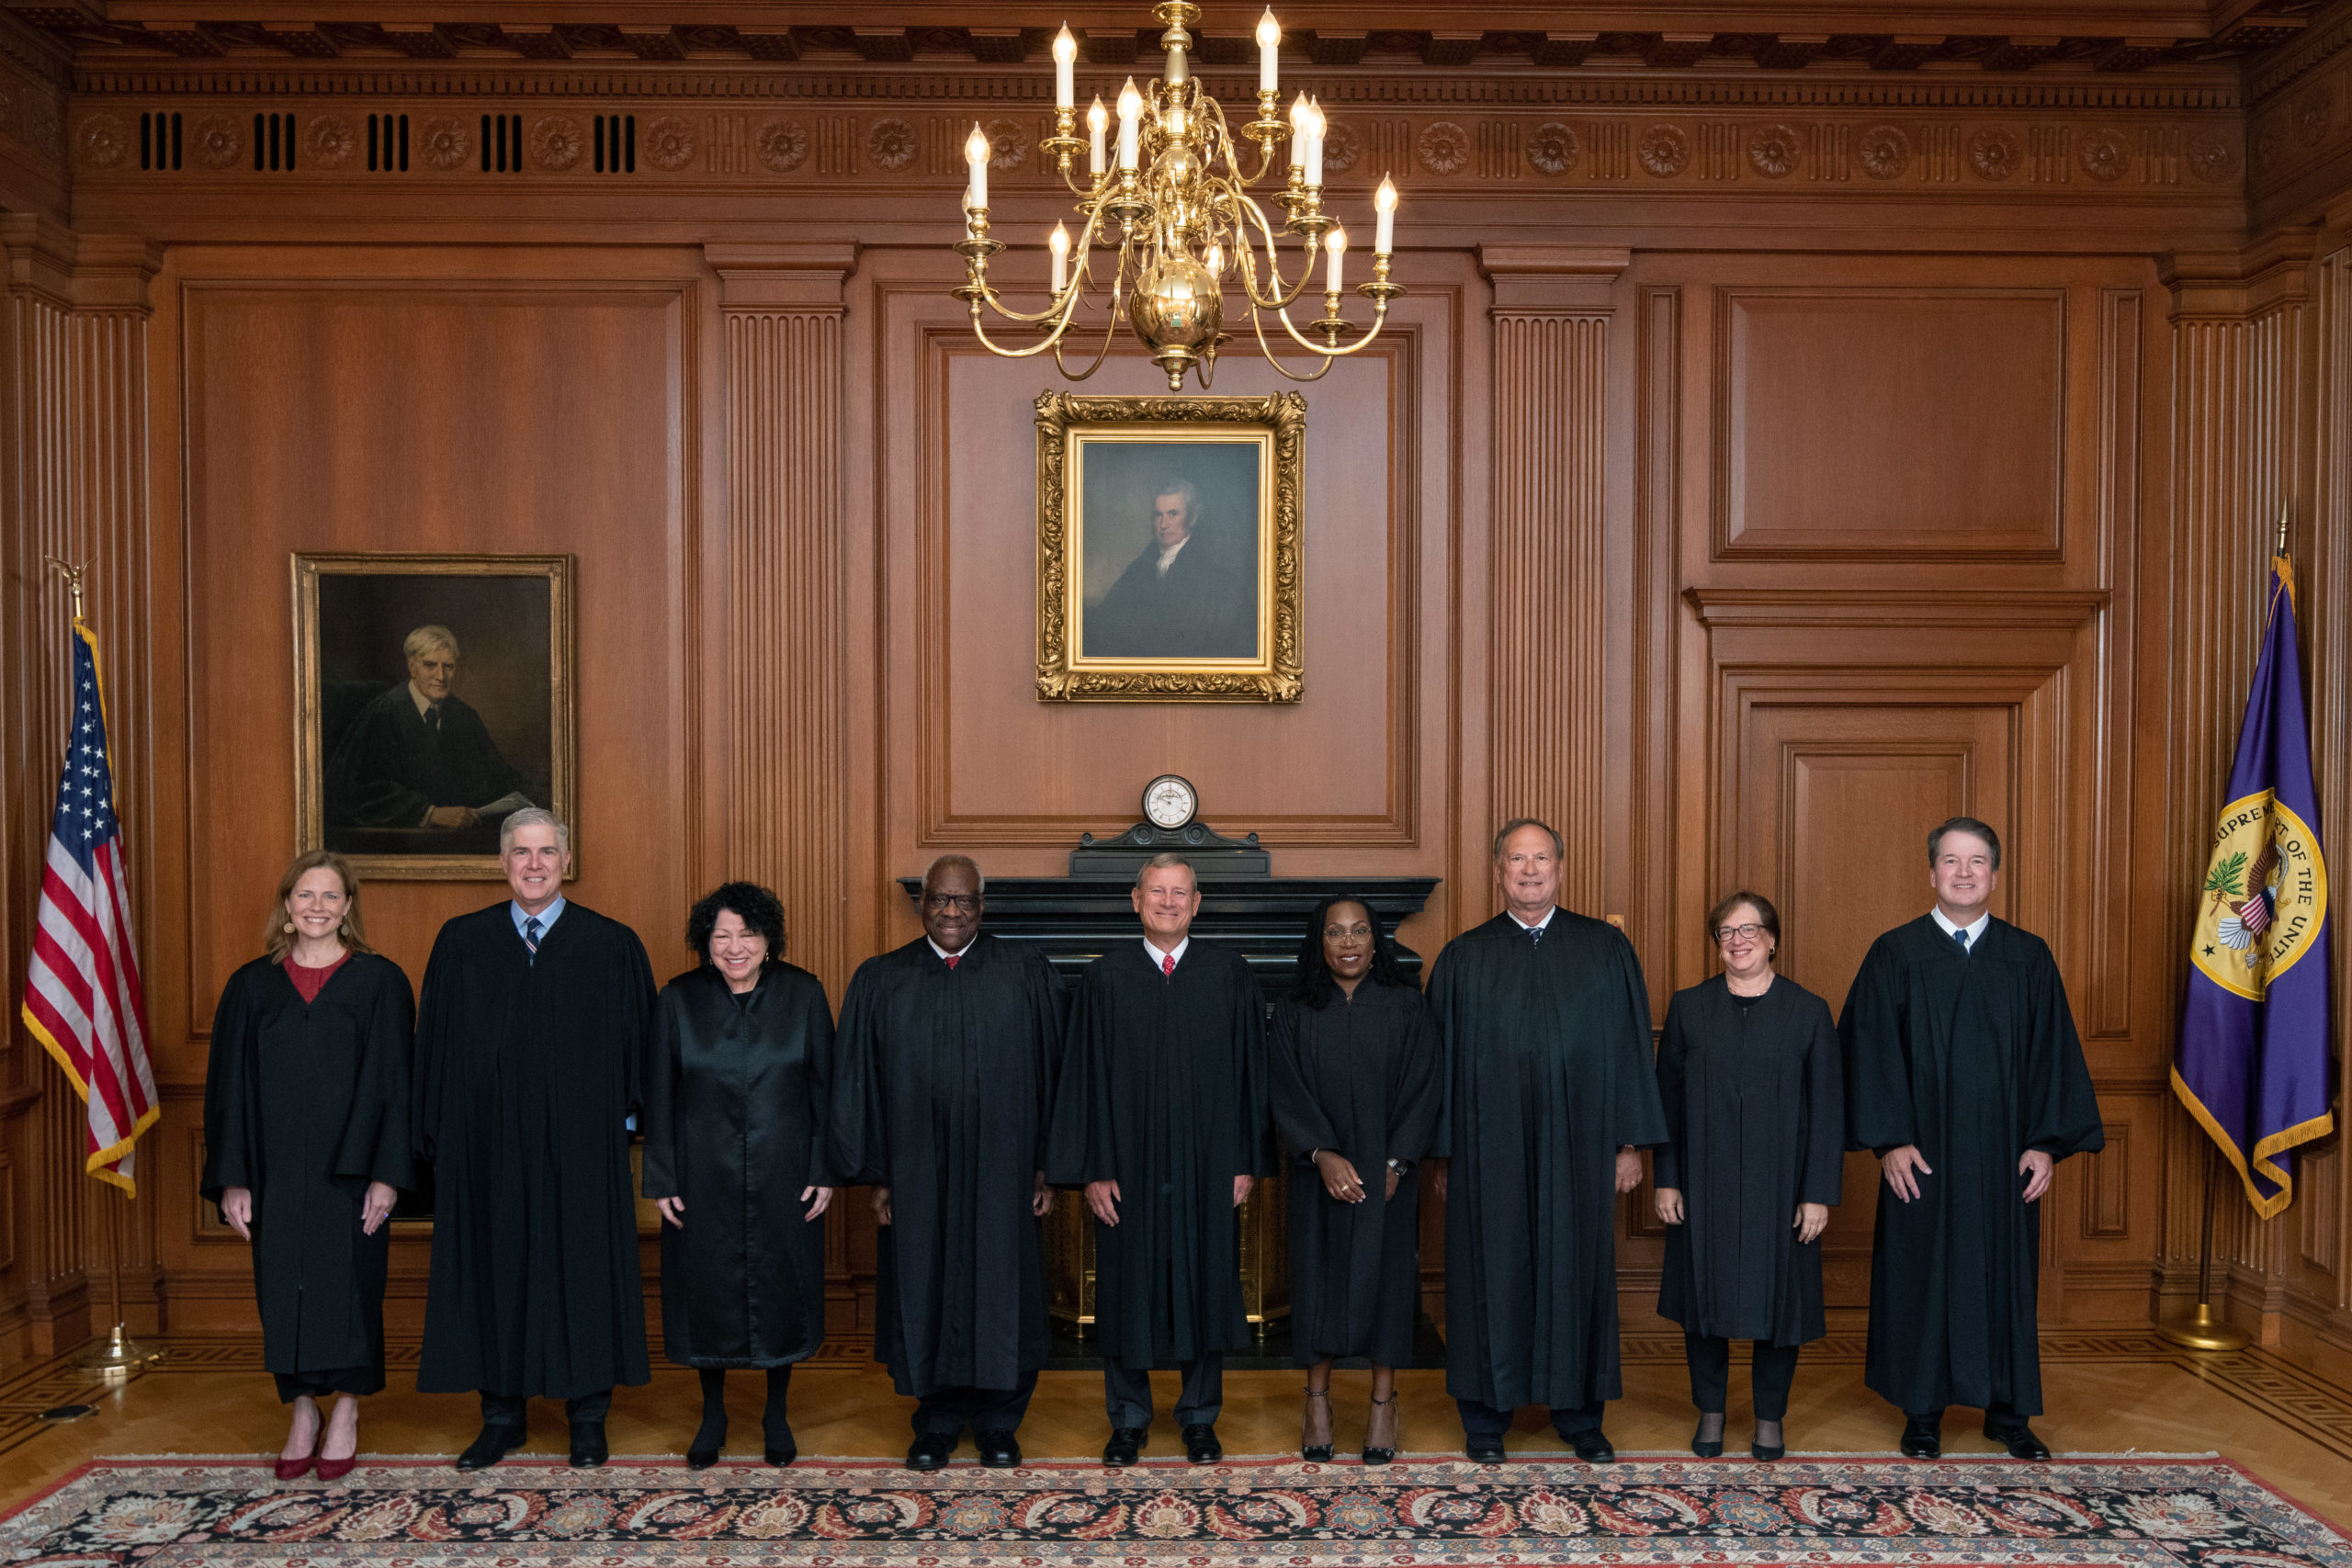 WASHINGTON, DC - SEPTEMBER 30: (EDITORIAL USE ONLY) In this handout provided by the Collection of the Supreme Court of the United States, Members of the Supreme Court (L-R) Associate Justices Amy Coney Barrett, Neil M. Gorsuch, Sonia Sotomayor, and Clarence Thomas, Chief Justice John G. Roberts, Jr., and Associate Justices Ketanji Brown Jackson, Samuel A. Alito, Jr., Elena Kagan, and Brett M. Kavanaugh pose in the Justices Conference Room prior to the formal investiture ceremony of Associate Justice Ketanji Brown Jackson September 30, 2022 in Washington, DC. President Joseph R. Biden, Jr., First Lady Dr. Jill Biden, Vice President Kamala Harris, and Second Gentleman Douglas Emhoff attended as guests of the Court. On June 30, 2022, Justice Jackson took the oaths of office to become the 104th Associate Justice of the Supreme Court of the United States. (Photo by Collection of the Supreme Court of the United States via Getty Images)